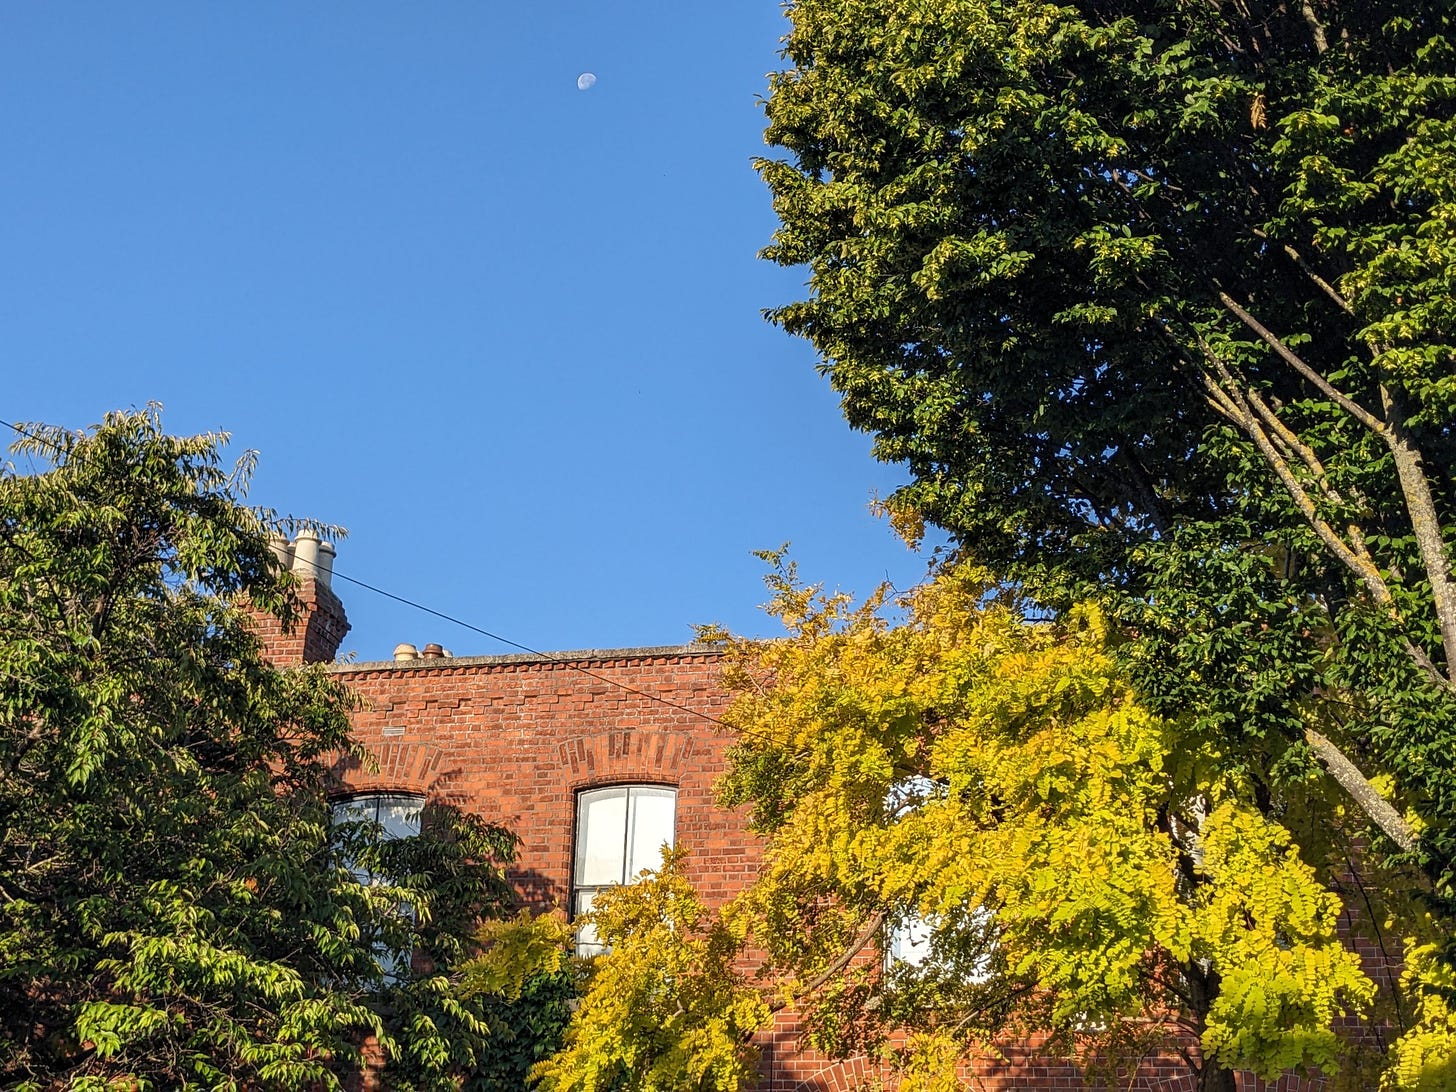 blue sky and partial moon over a red brick house and bright green and yellow treetops